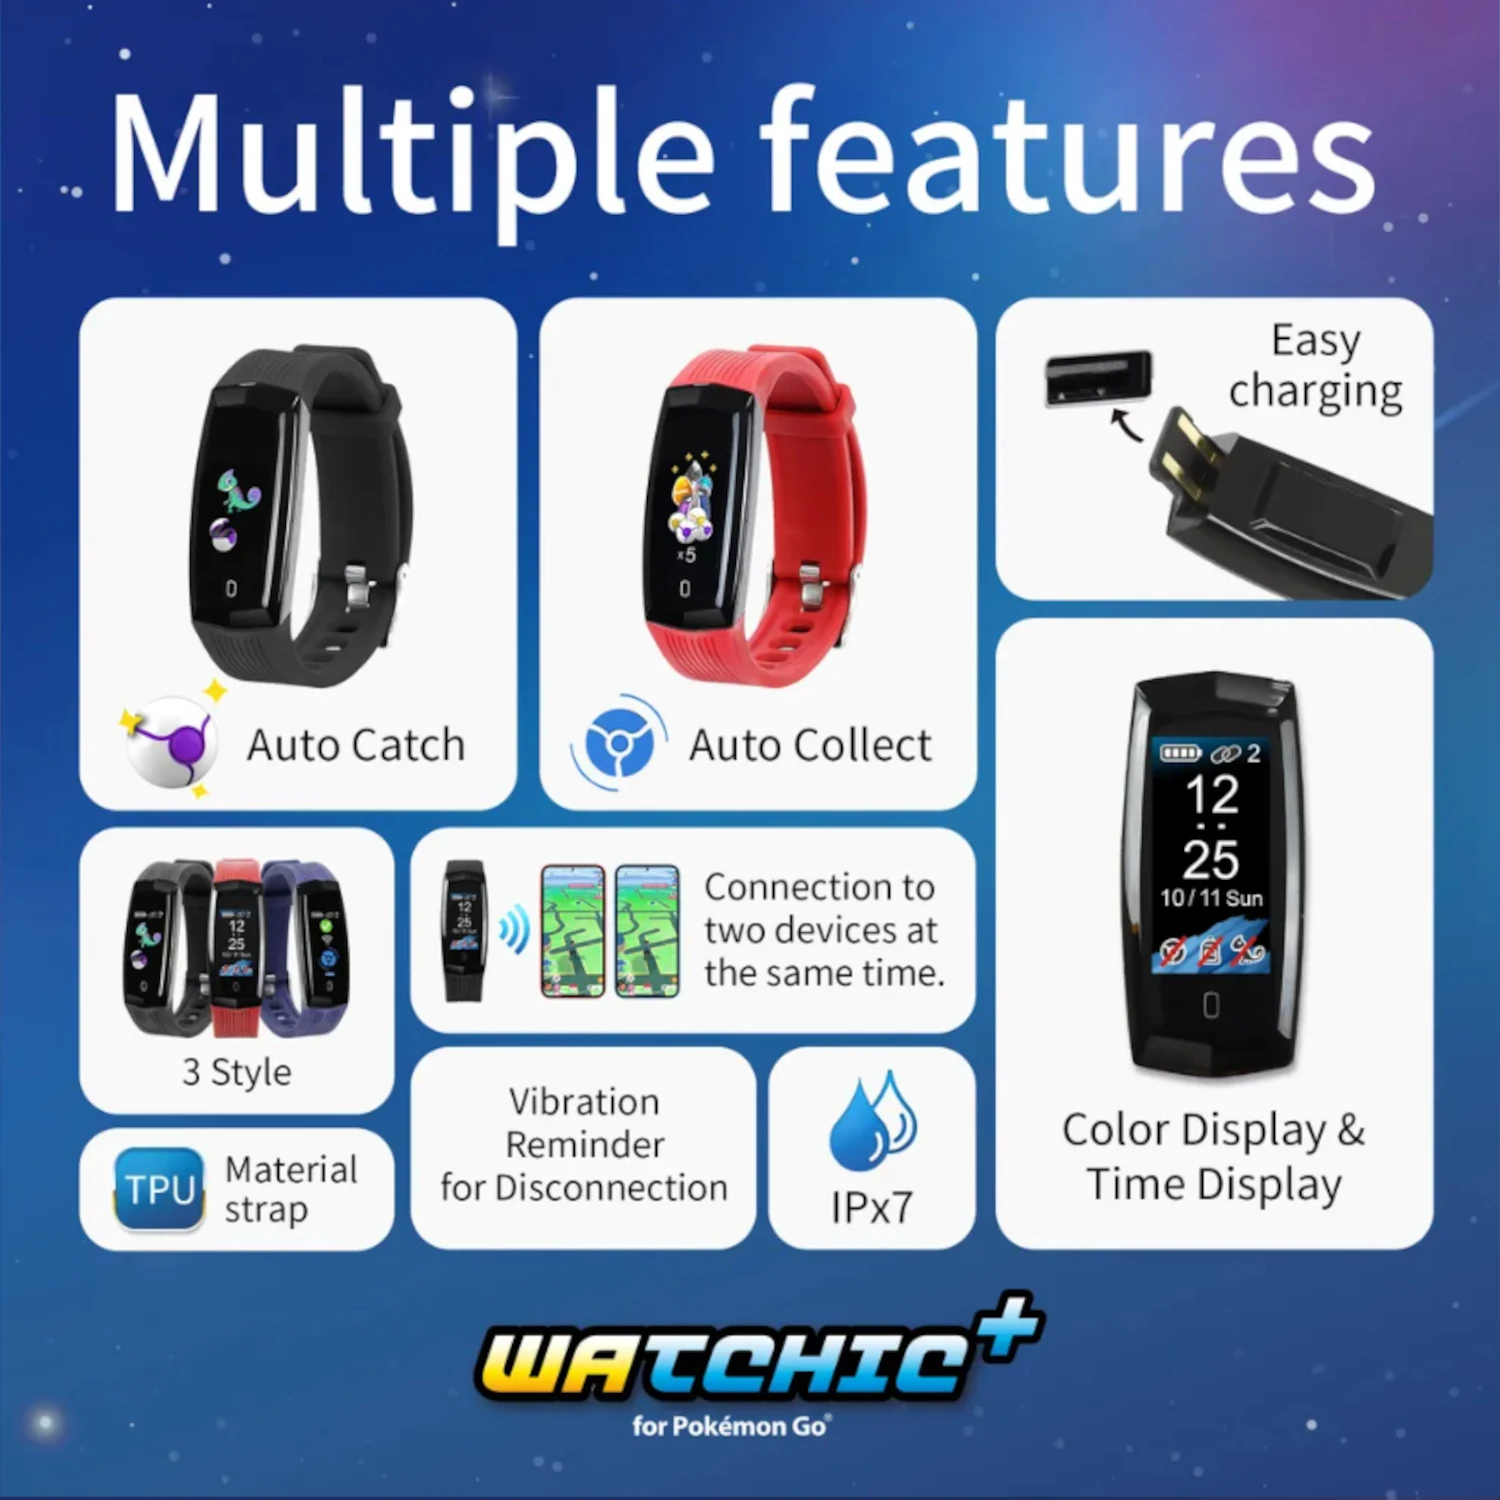 https://ae01.alicdn.com/kf/S2c0aa32587f64f1698ebeafc85647282N/Brook-Auto-Catch-Watchic-Plus-Bracelet-Wristband-For-Pokemon-Go-Plus-Gaming-for-Bluetooth-compatible-for.jpg